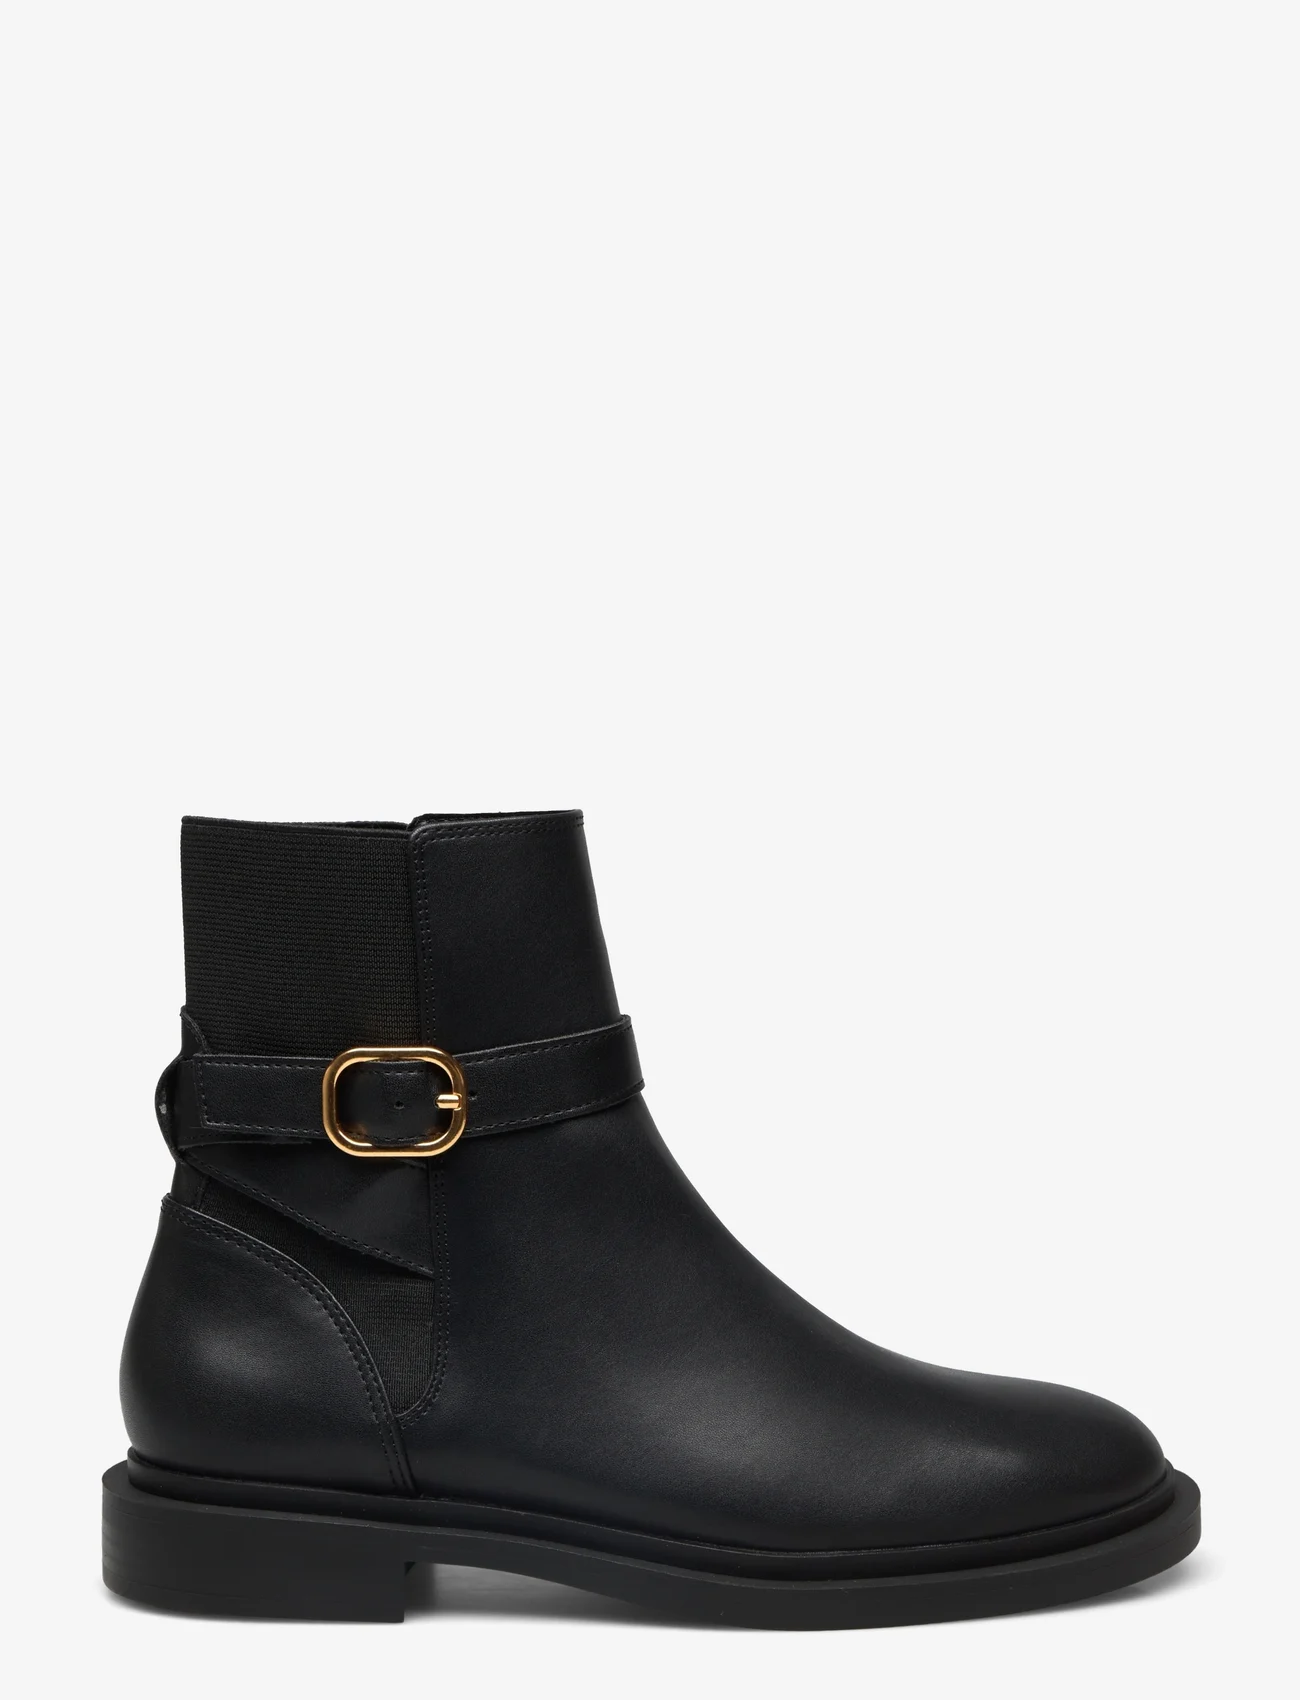 Mango - Ankle boots with elastic panel and buckle - flate ankelstøvletter - black - 1